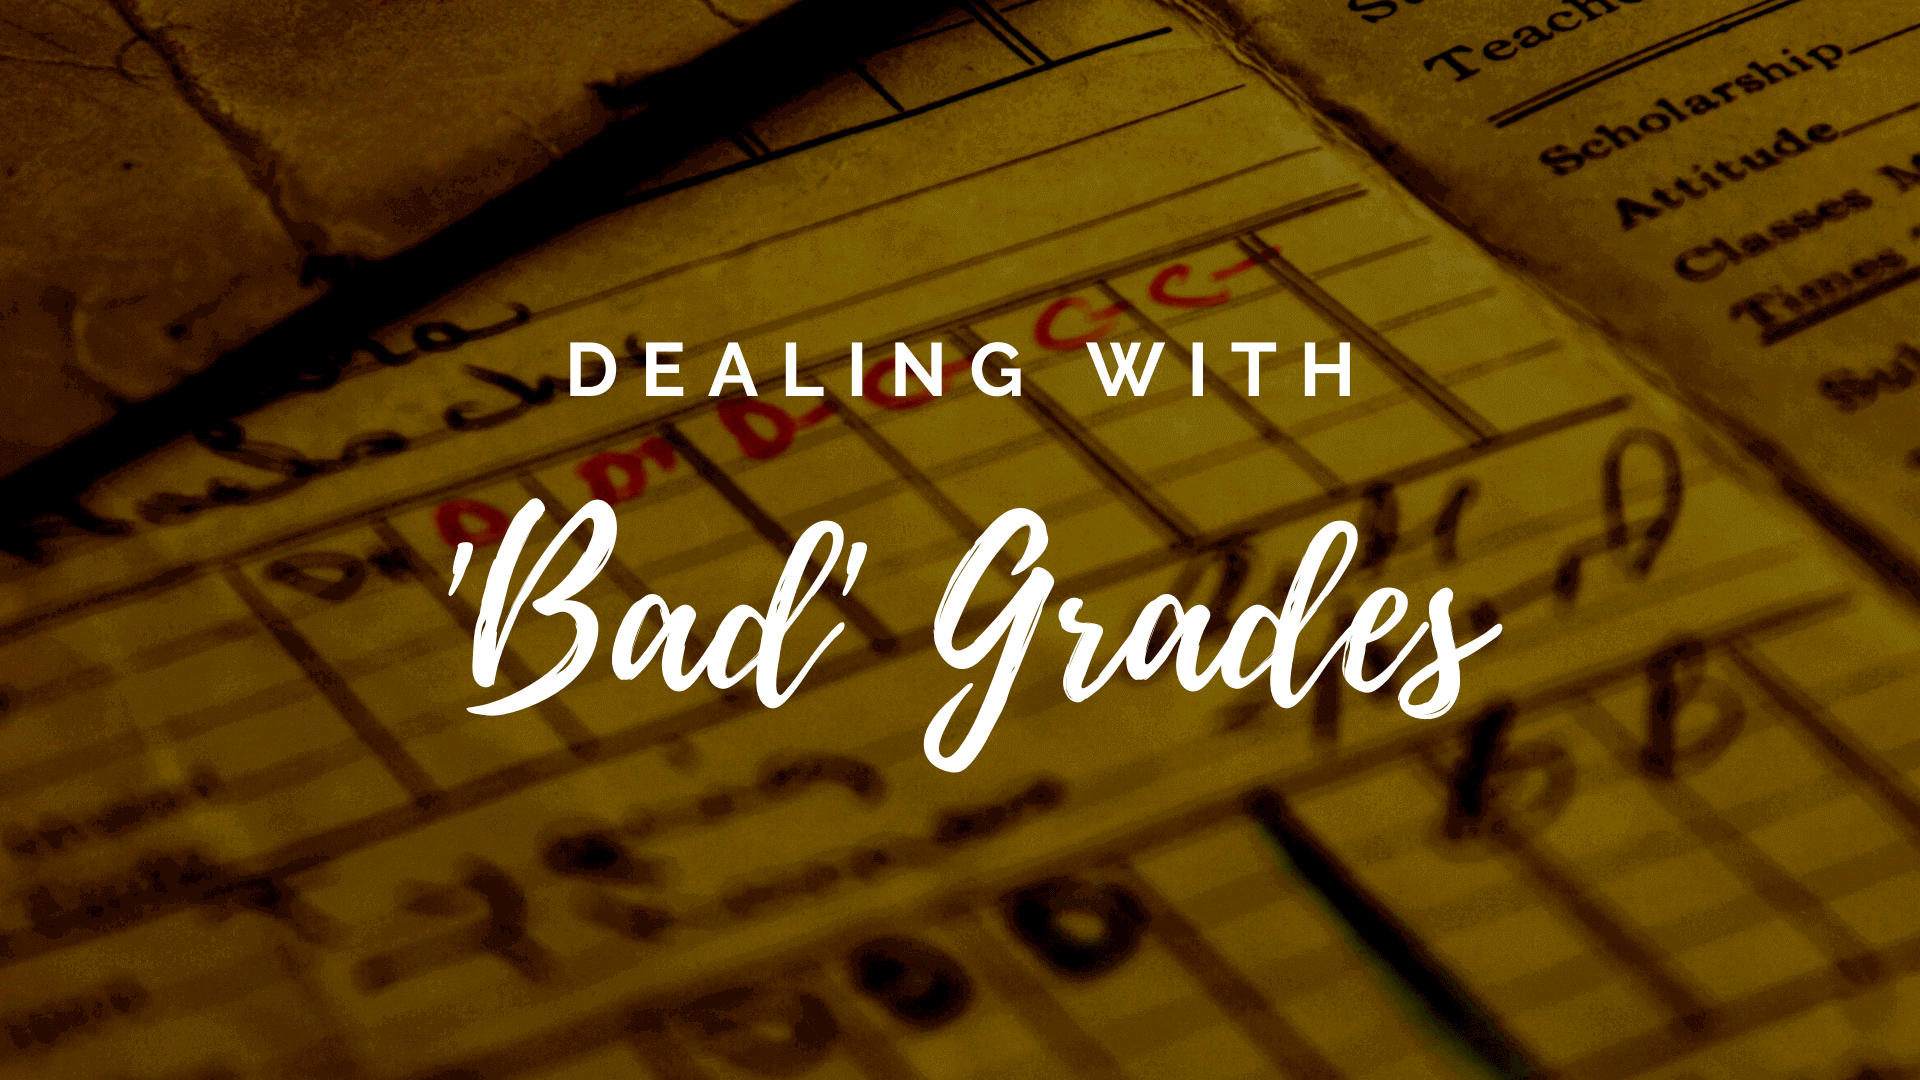 How to Deal with 'Bad' Grades